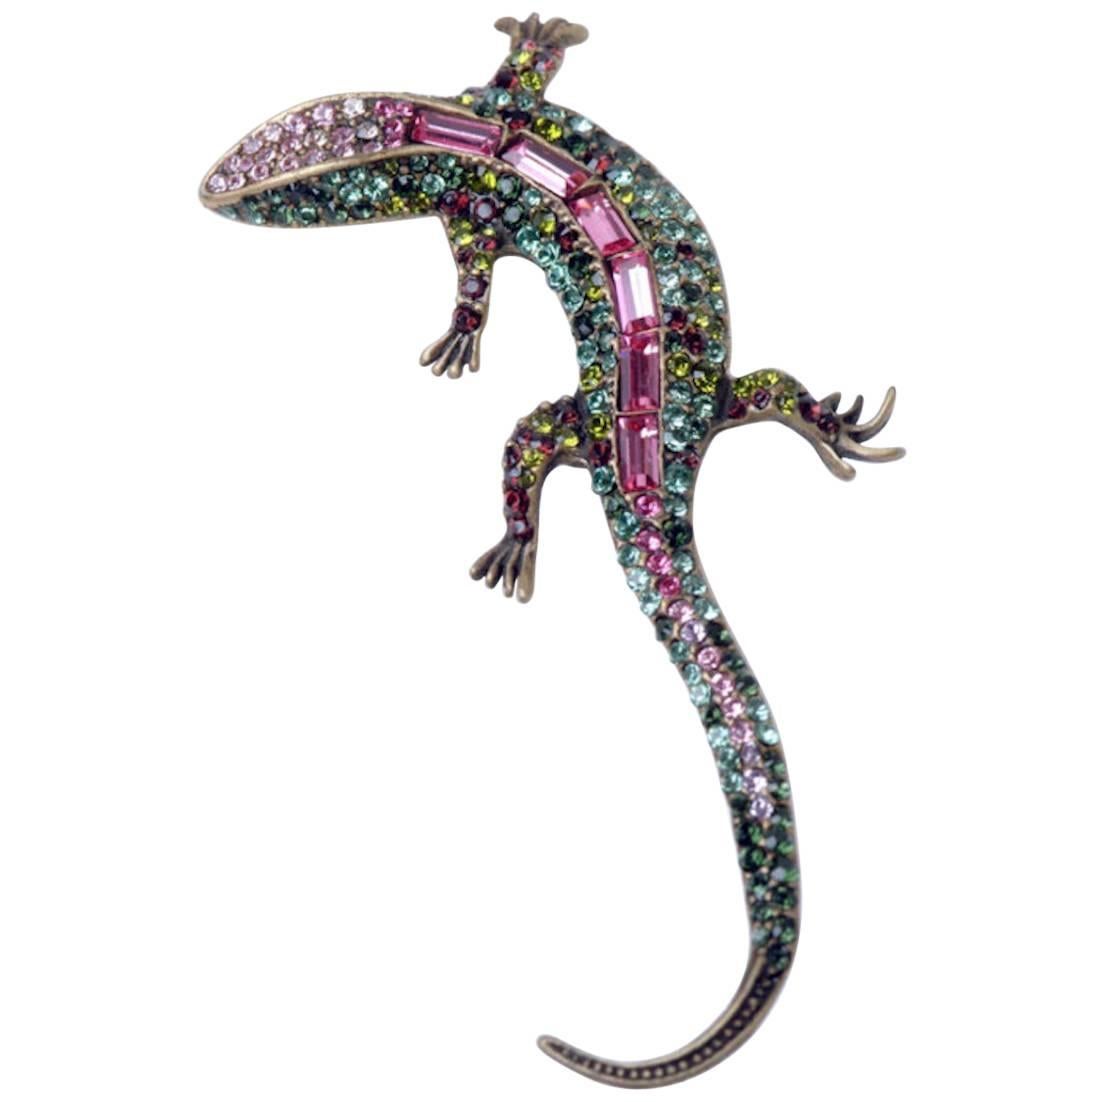 Vintage Jay Strongwater Salamander Brooch-Makes A Great Gift! For Sale ...